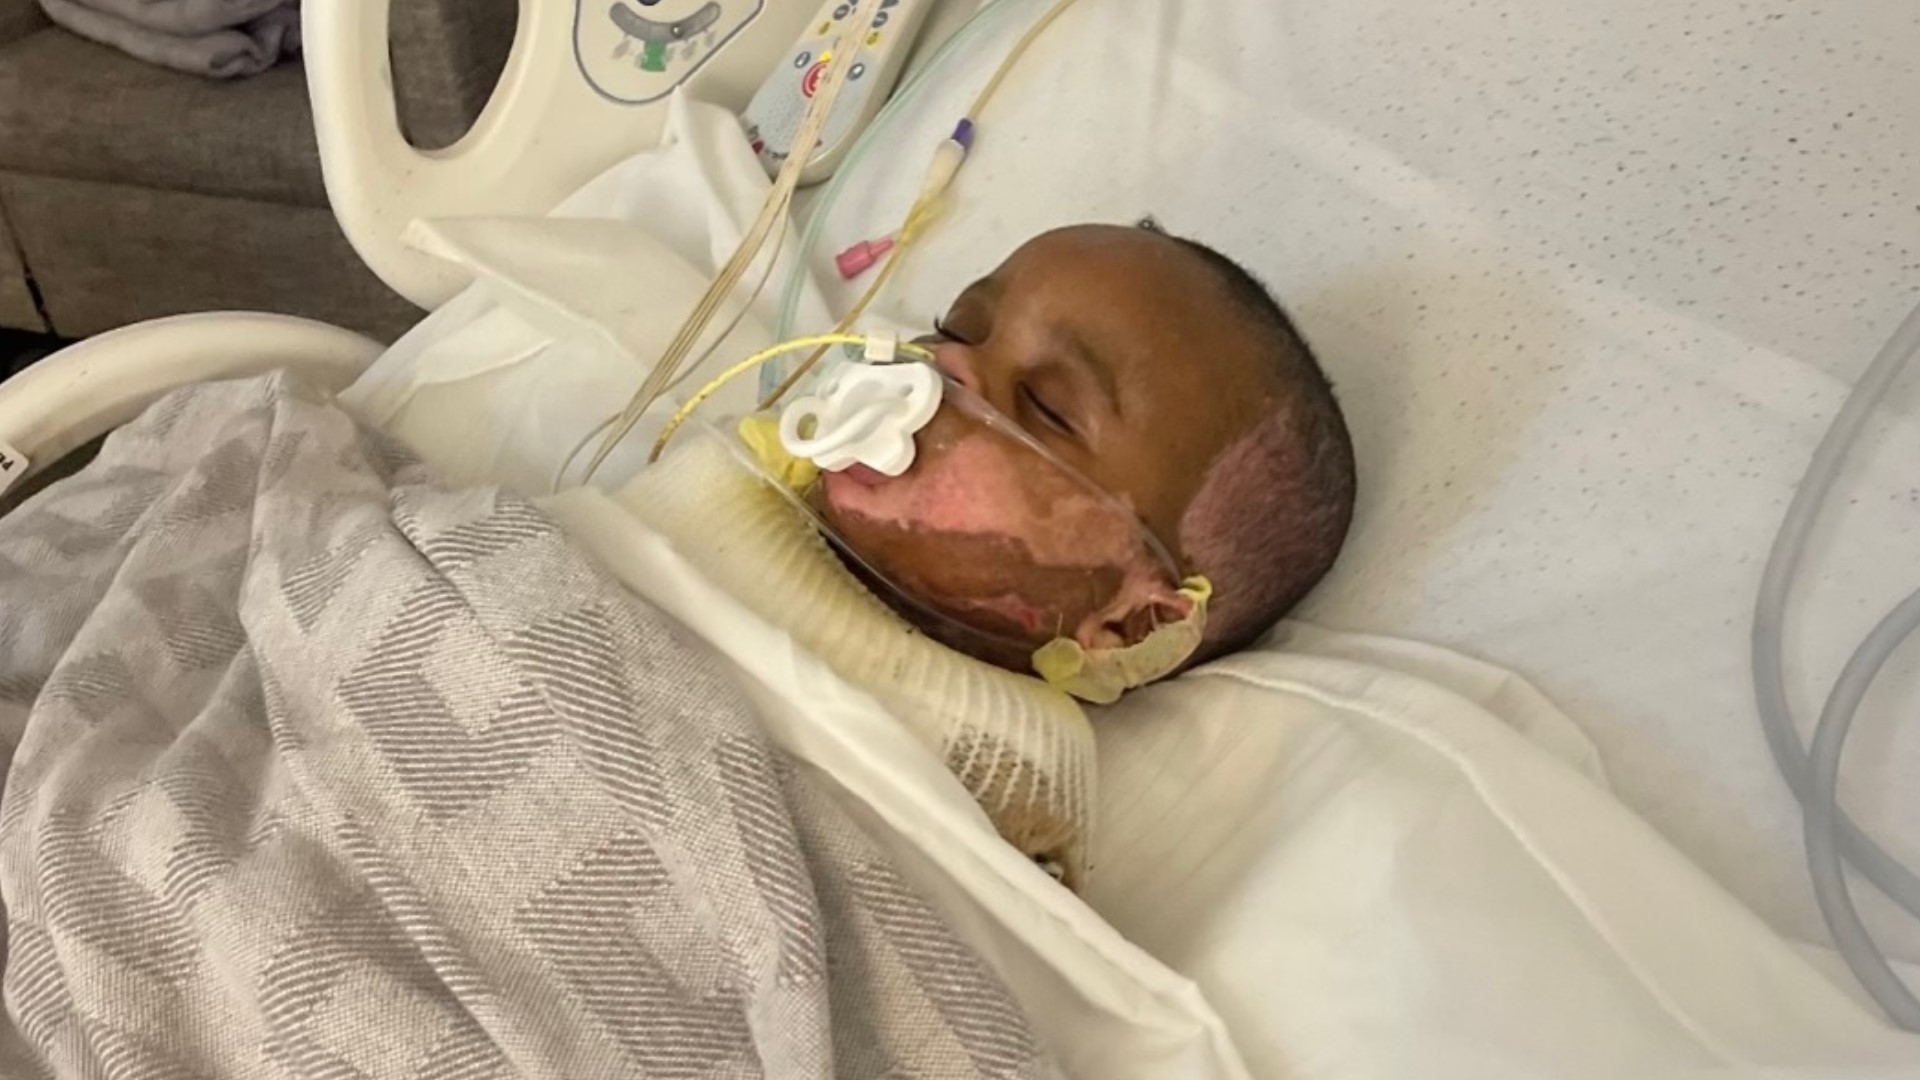 The 17-month-old from Powder Springs was taken off sedation but still has a tough recovery ahead at Augusta's pediatric burn unit.